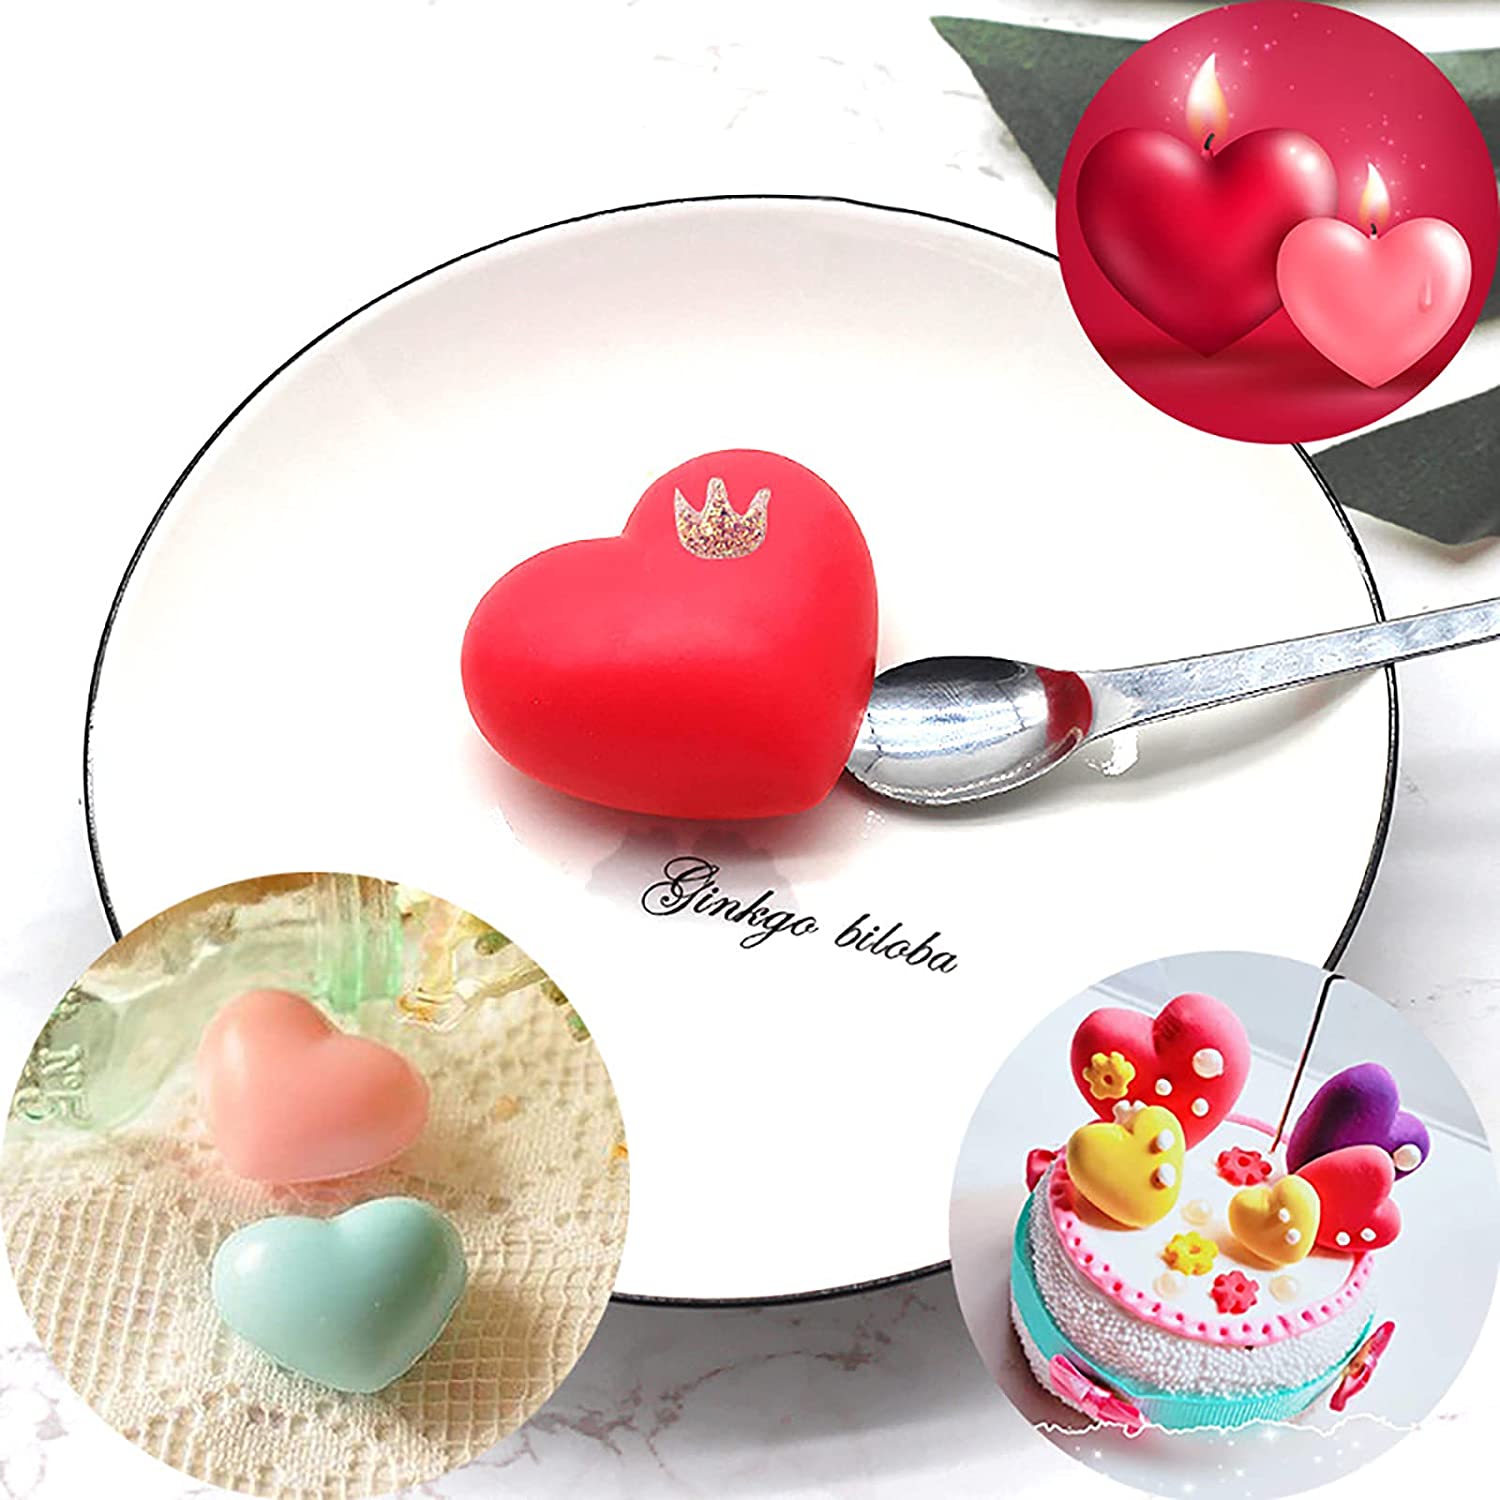 2-Pcs-Love-Heart-Shape-Silicone-Mold-Silicone-Moulds-3D-Heart-Soap-Mold-for-DIY-Handmade-Soap-Crafts-Silicone-Heart-Pend-B094XZ22RW-4.jpg